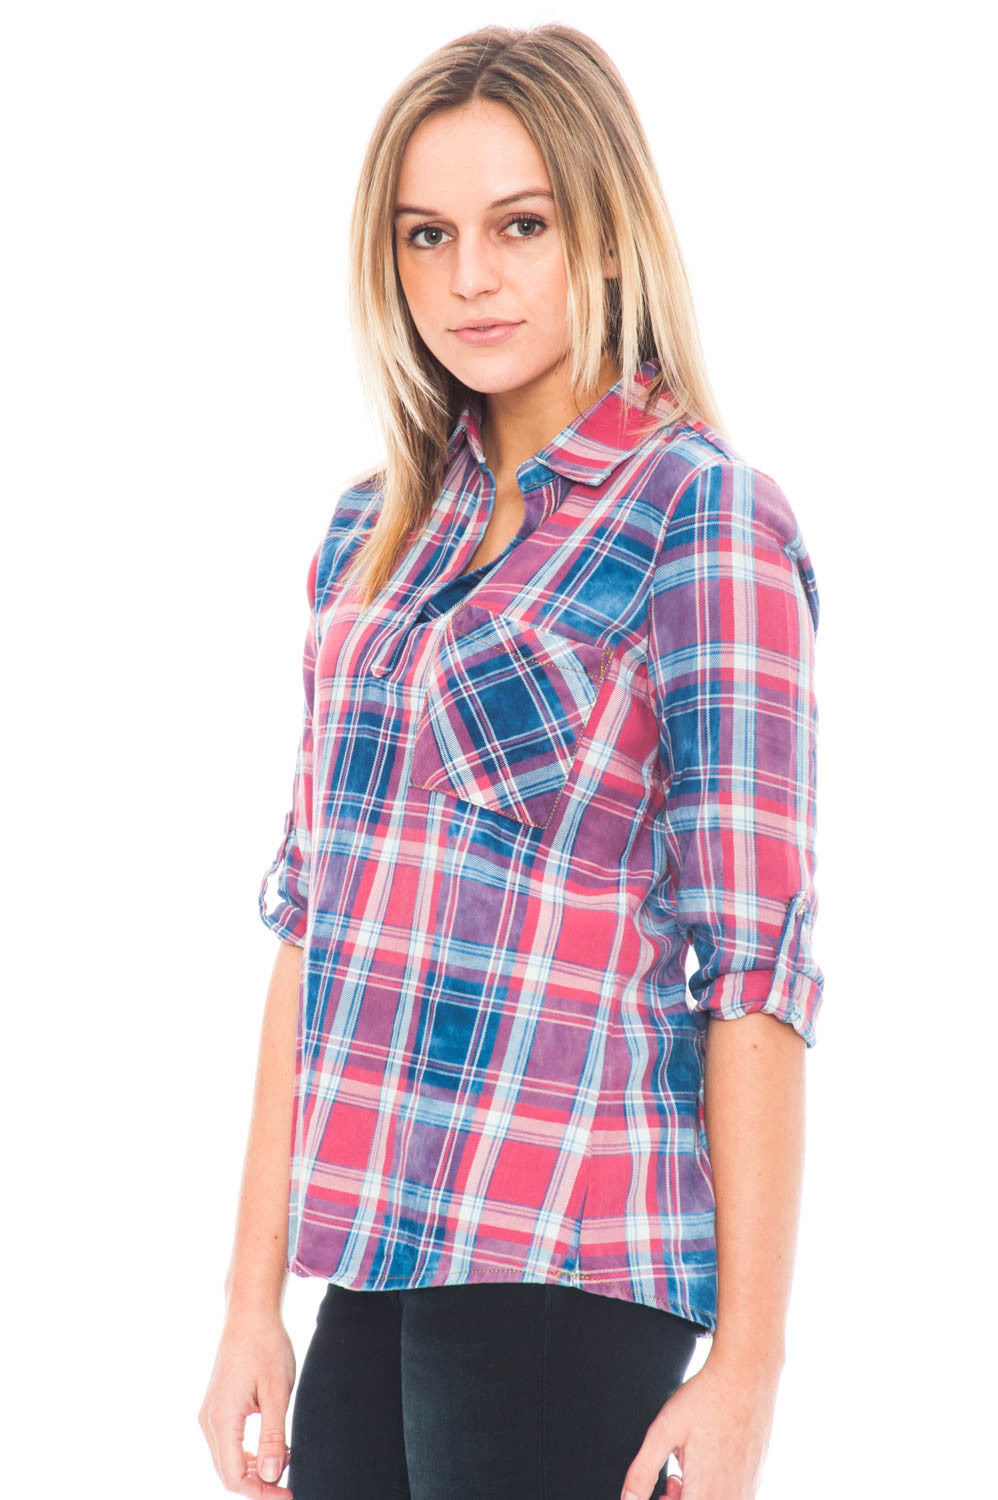 Shirt - 3/4 Sleeve Vintage Plaid Top with Relaxed Collar